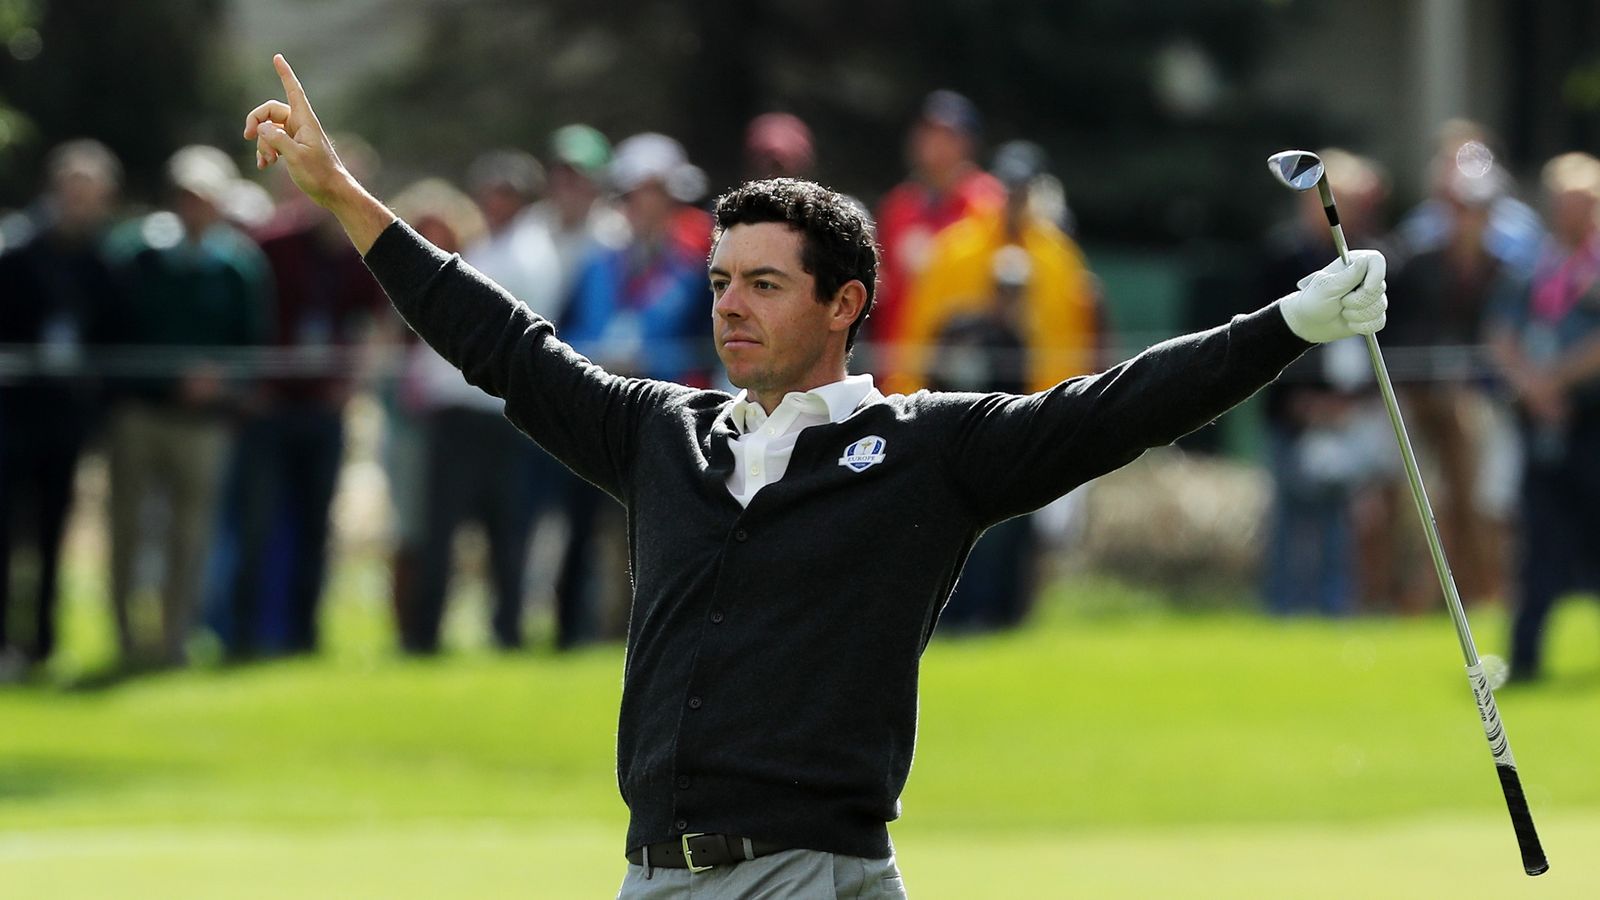 Rory McIlroy warms up for the Ryder Cup with an eagle from the fairway